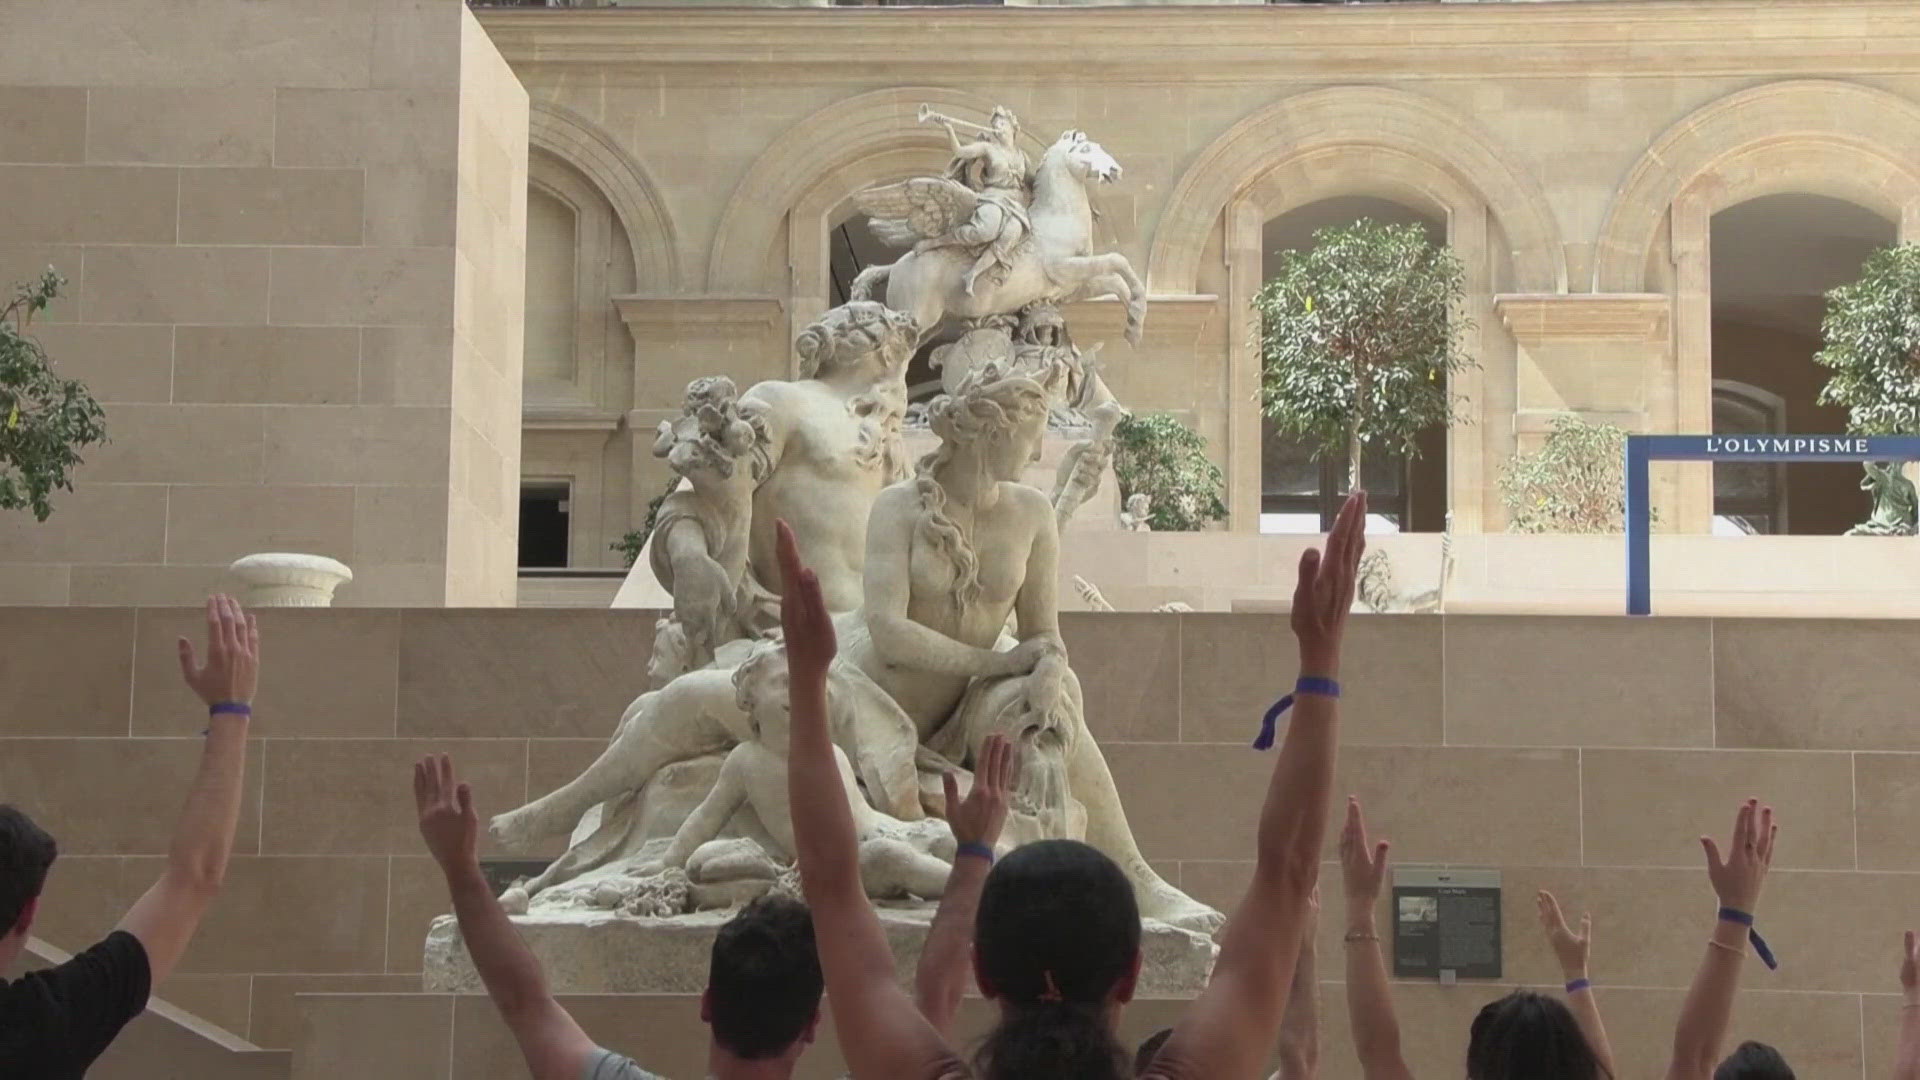 It's an opportunity for visitors to do sports among artworks in a deserted museum as the French capital gears up for the Olympics.